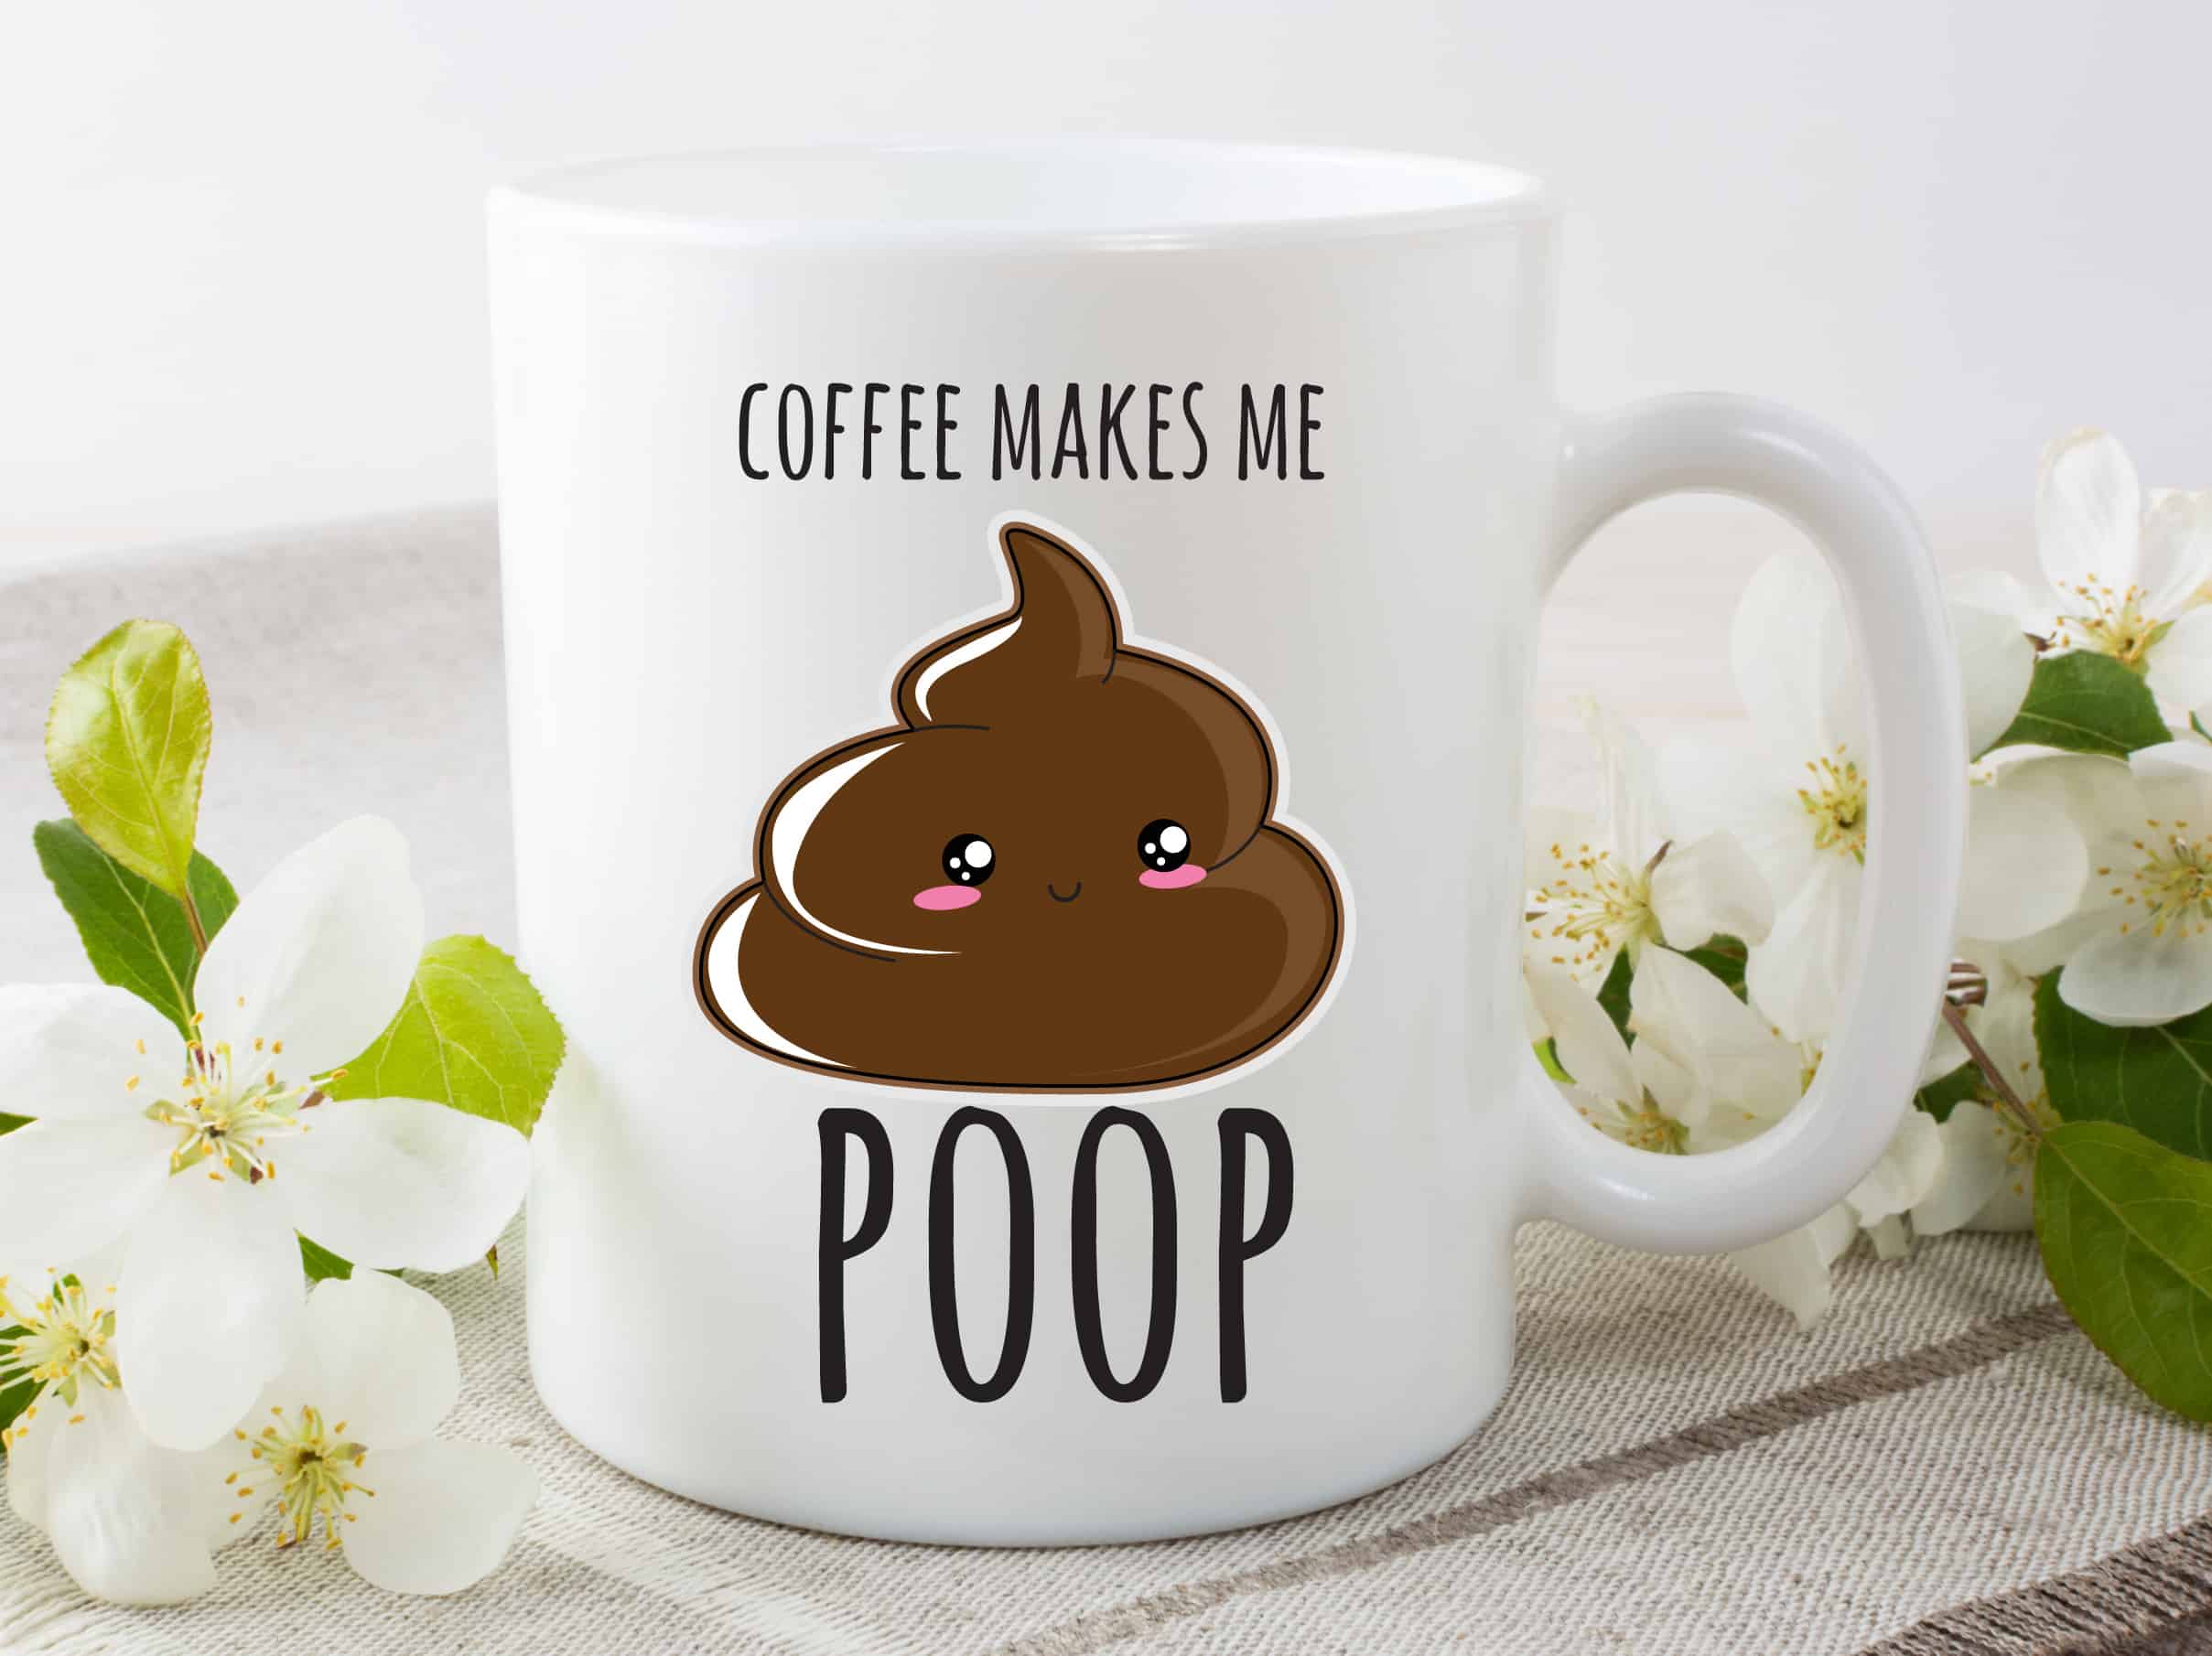 Why does coffee make you poop? Scientists are investigating.